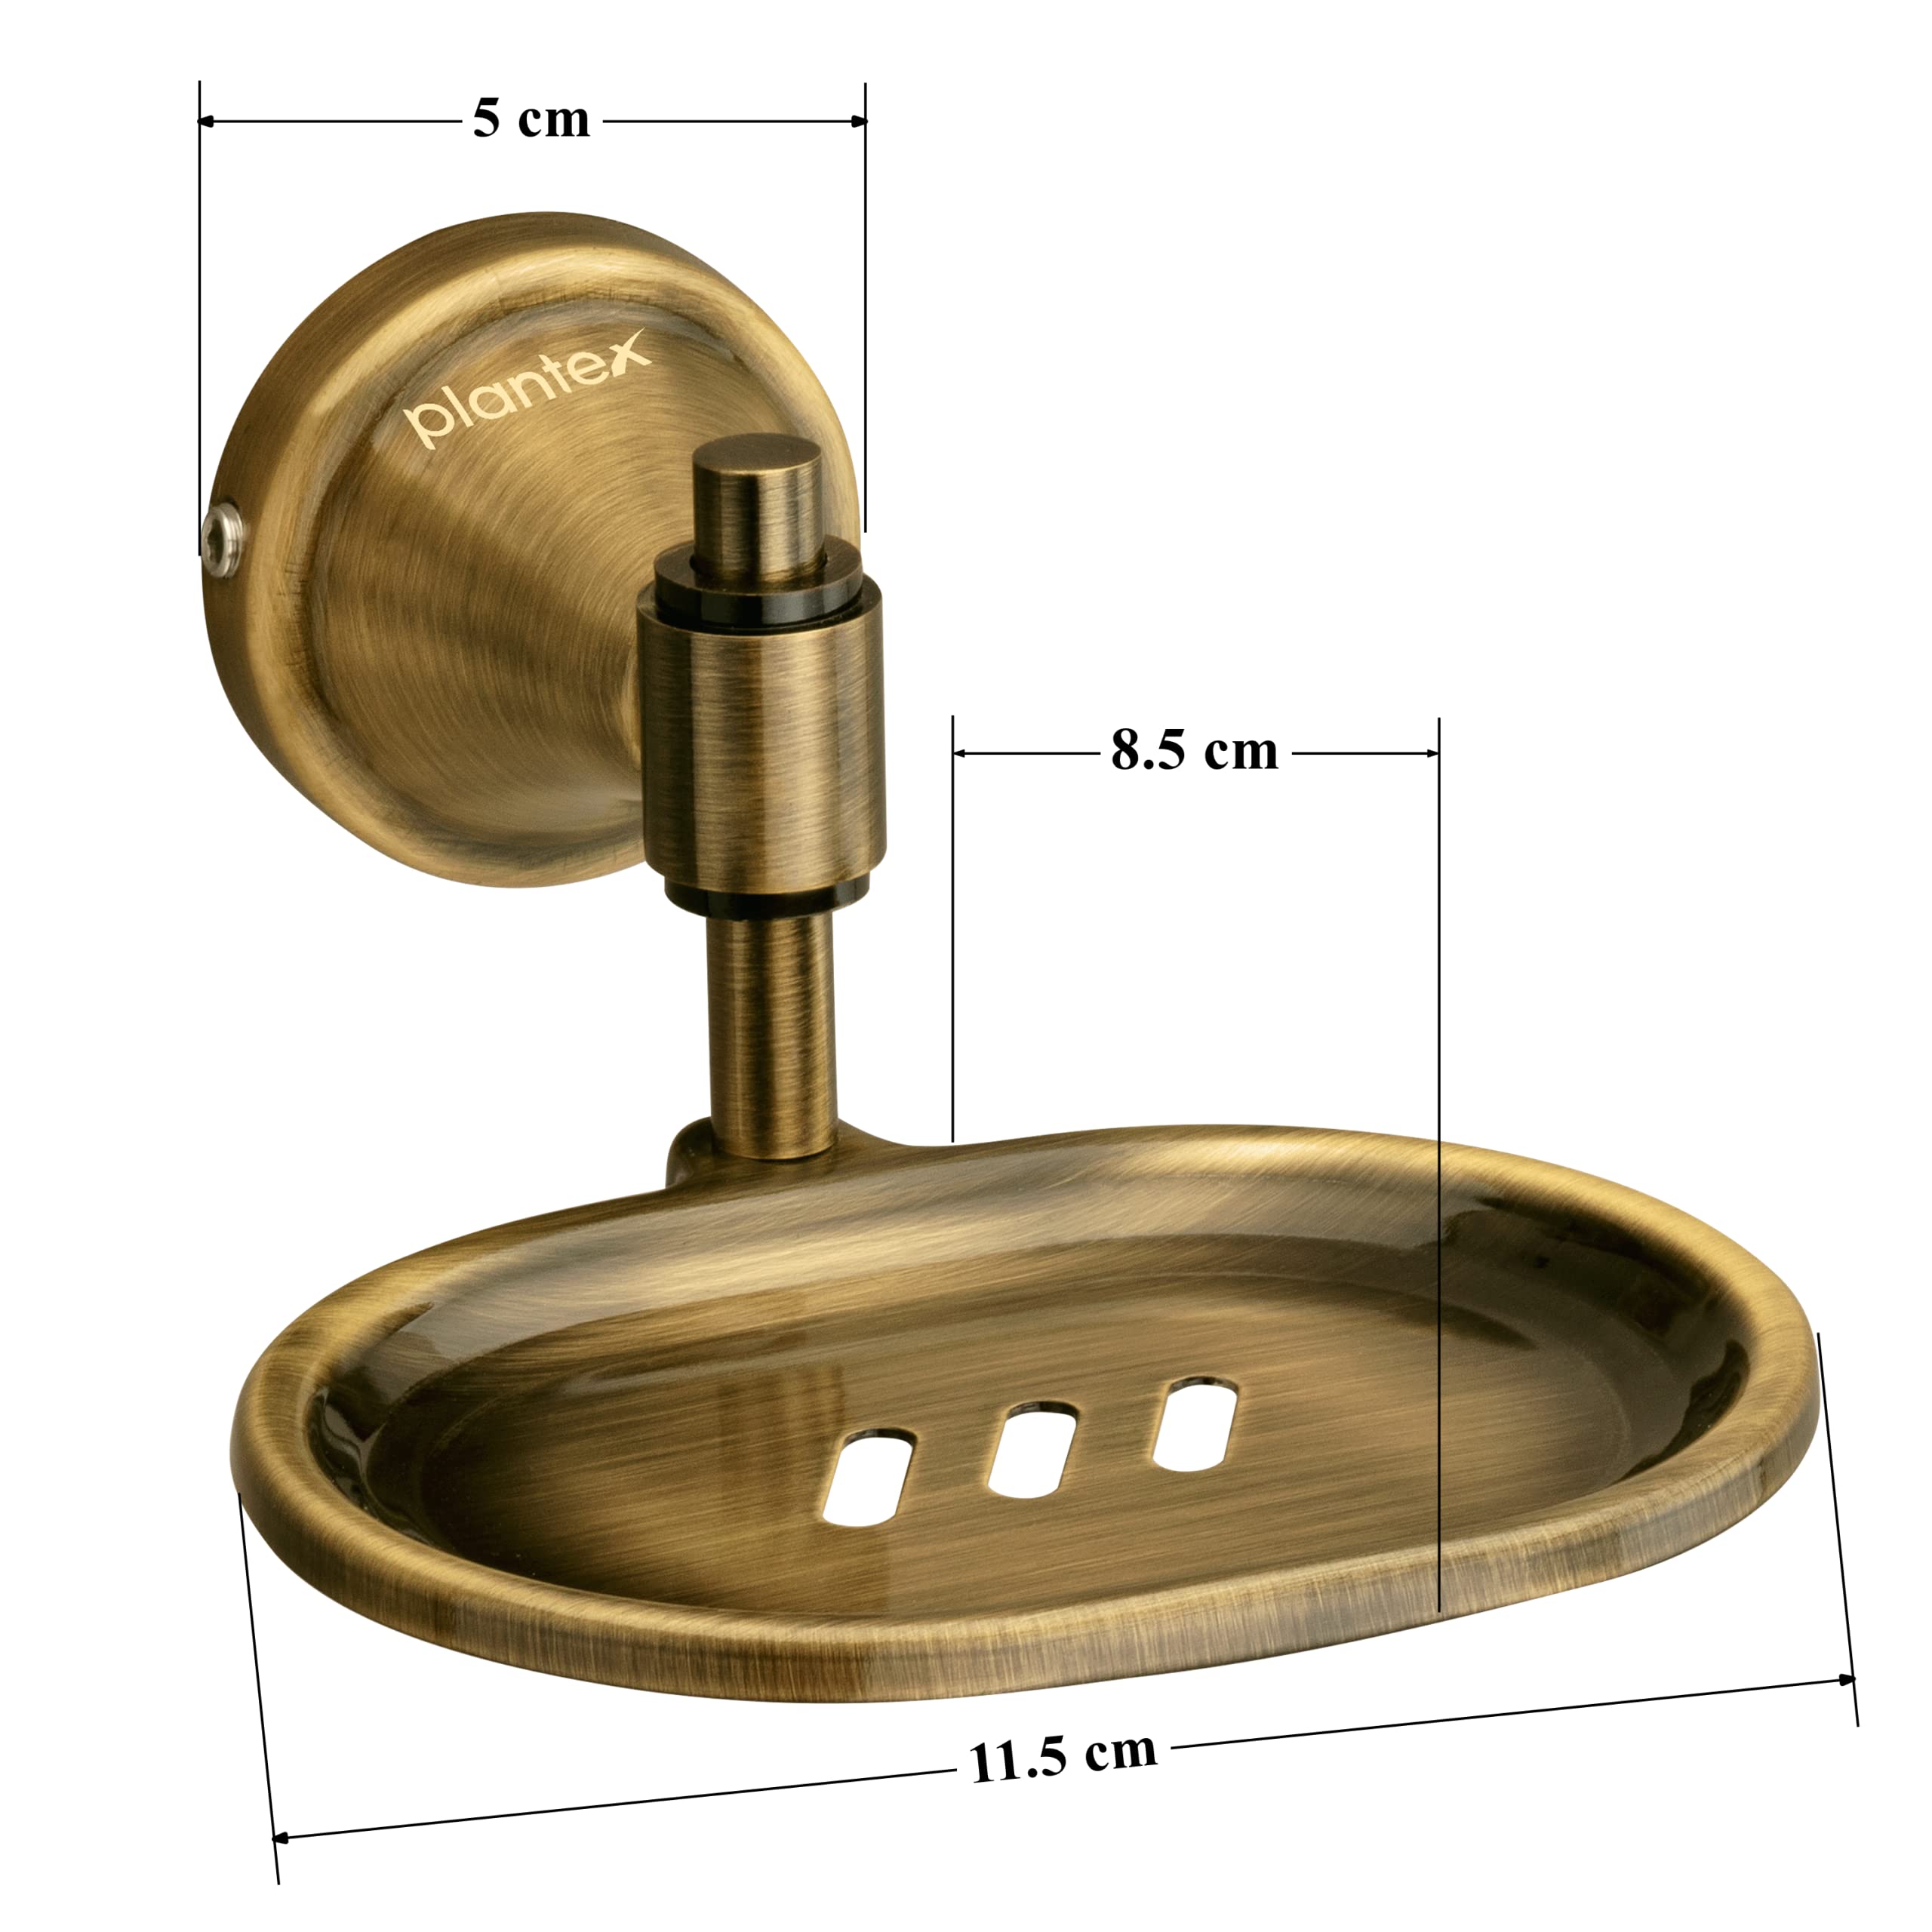 Plantex Niko Antique soap Holder Stand for Bathroom and wash Basin (304 Stainless Steel)